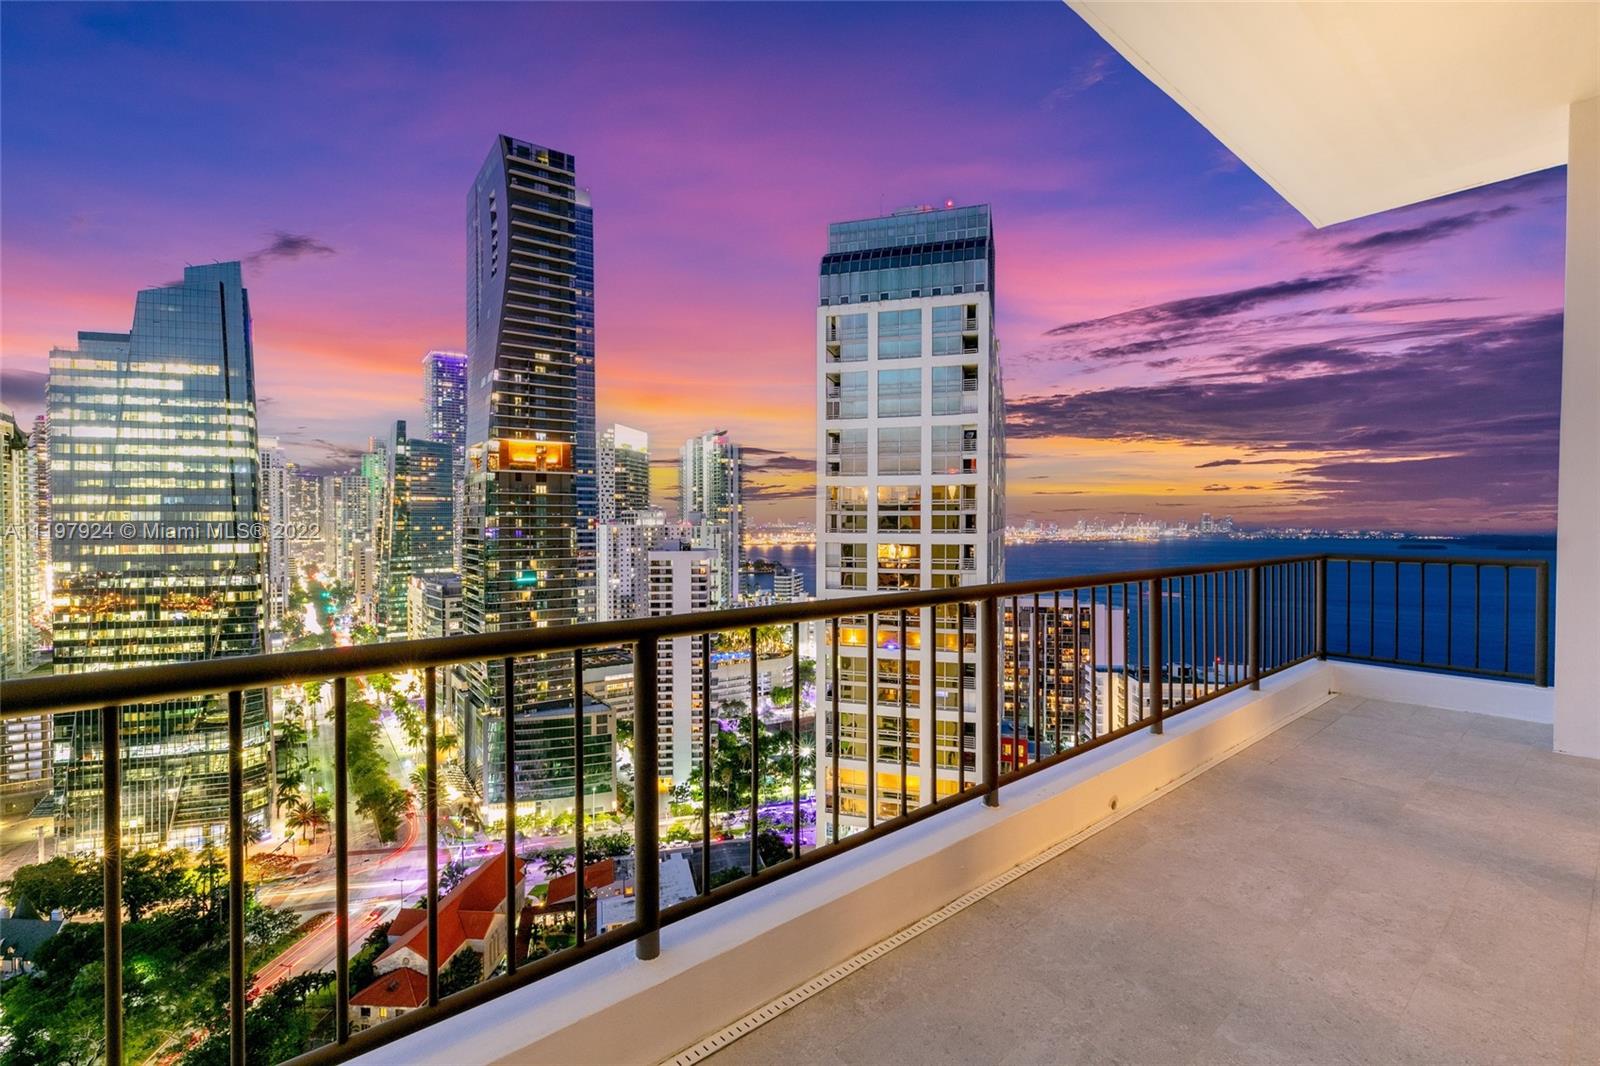 Enjoy living in this exquisitely furnished 4BR/4+1BA, 4,130 SF double penthouse meticulously combined & fully remodeled. Boasting breathtaking city, Biscayne Bay & ocean views this expansive residence features high ceilings, an open floorplan, 4 balconies, 12ft windows, smart home w/ surround sound, gourmet kitchen, top-of-the-line appliances, high-end German cabinetry & a wine fridge. The spacious bedrooms feature views, balconies, ample storage & closet space. The primary bedroom features a walk-in closet, large sitting area, spa bathroom w/ double sinks, separate tub & shower w/ jets. Full-service luxury building w/ 24 hr security, valet parking, concierge, pool w/ barbecue area, marina, library, kids’ playroom, private entertainment areas & state of the art gym & spa.